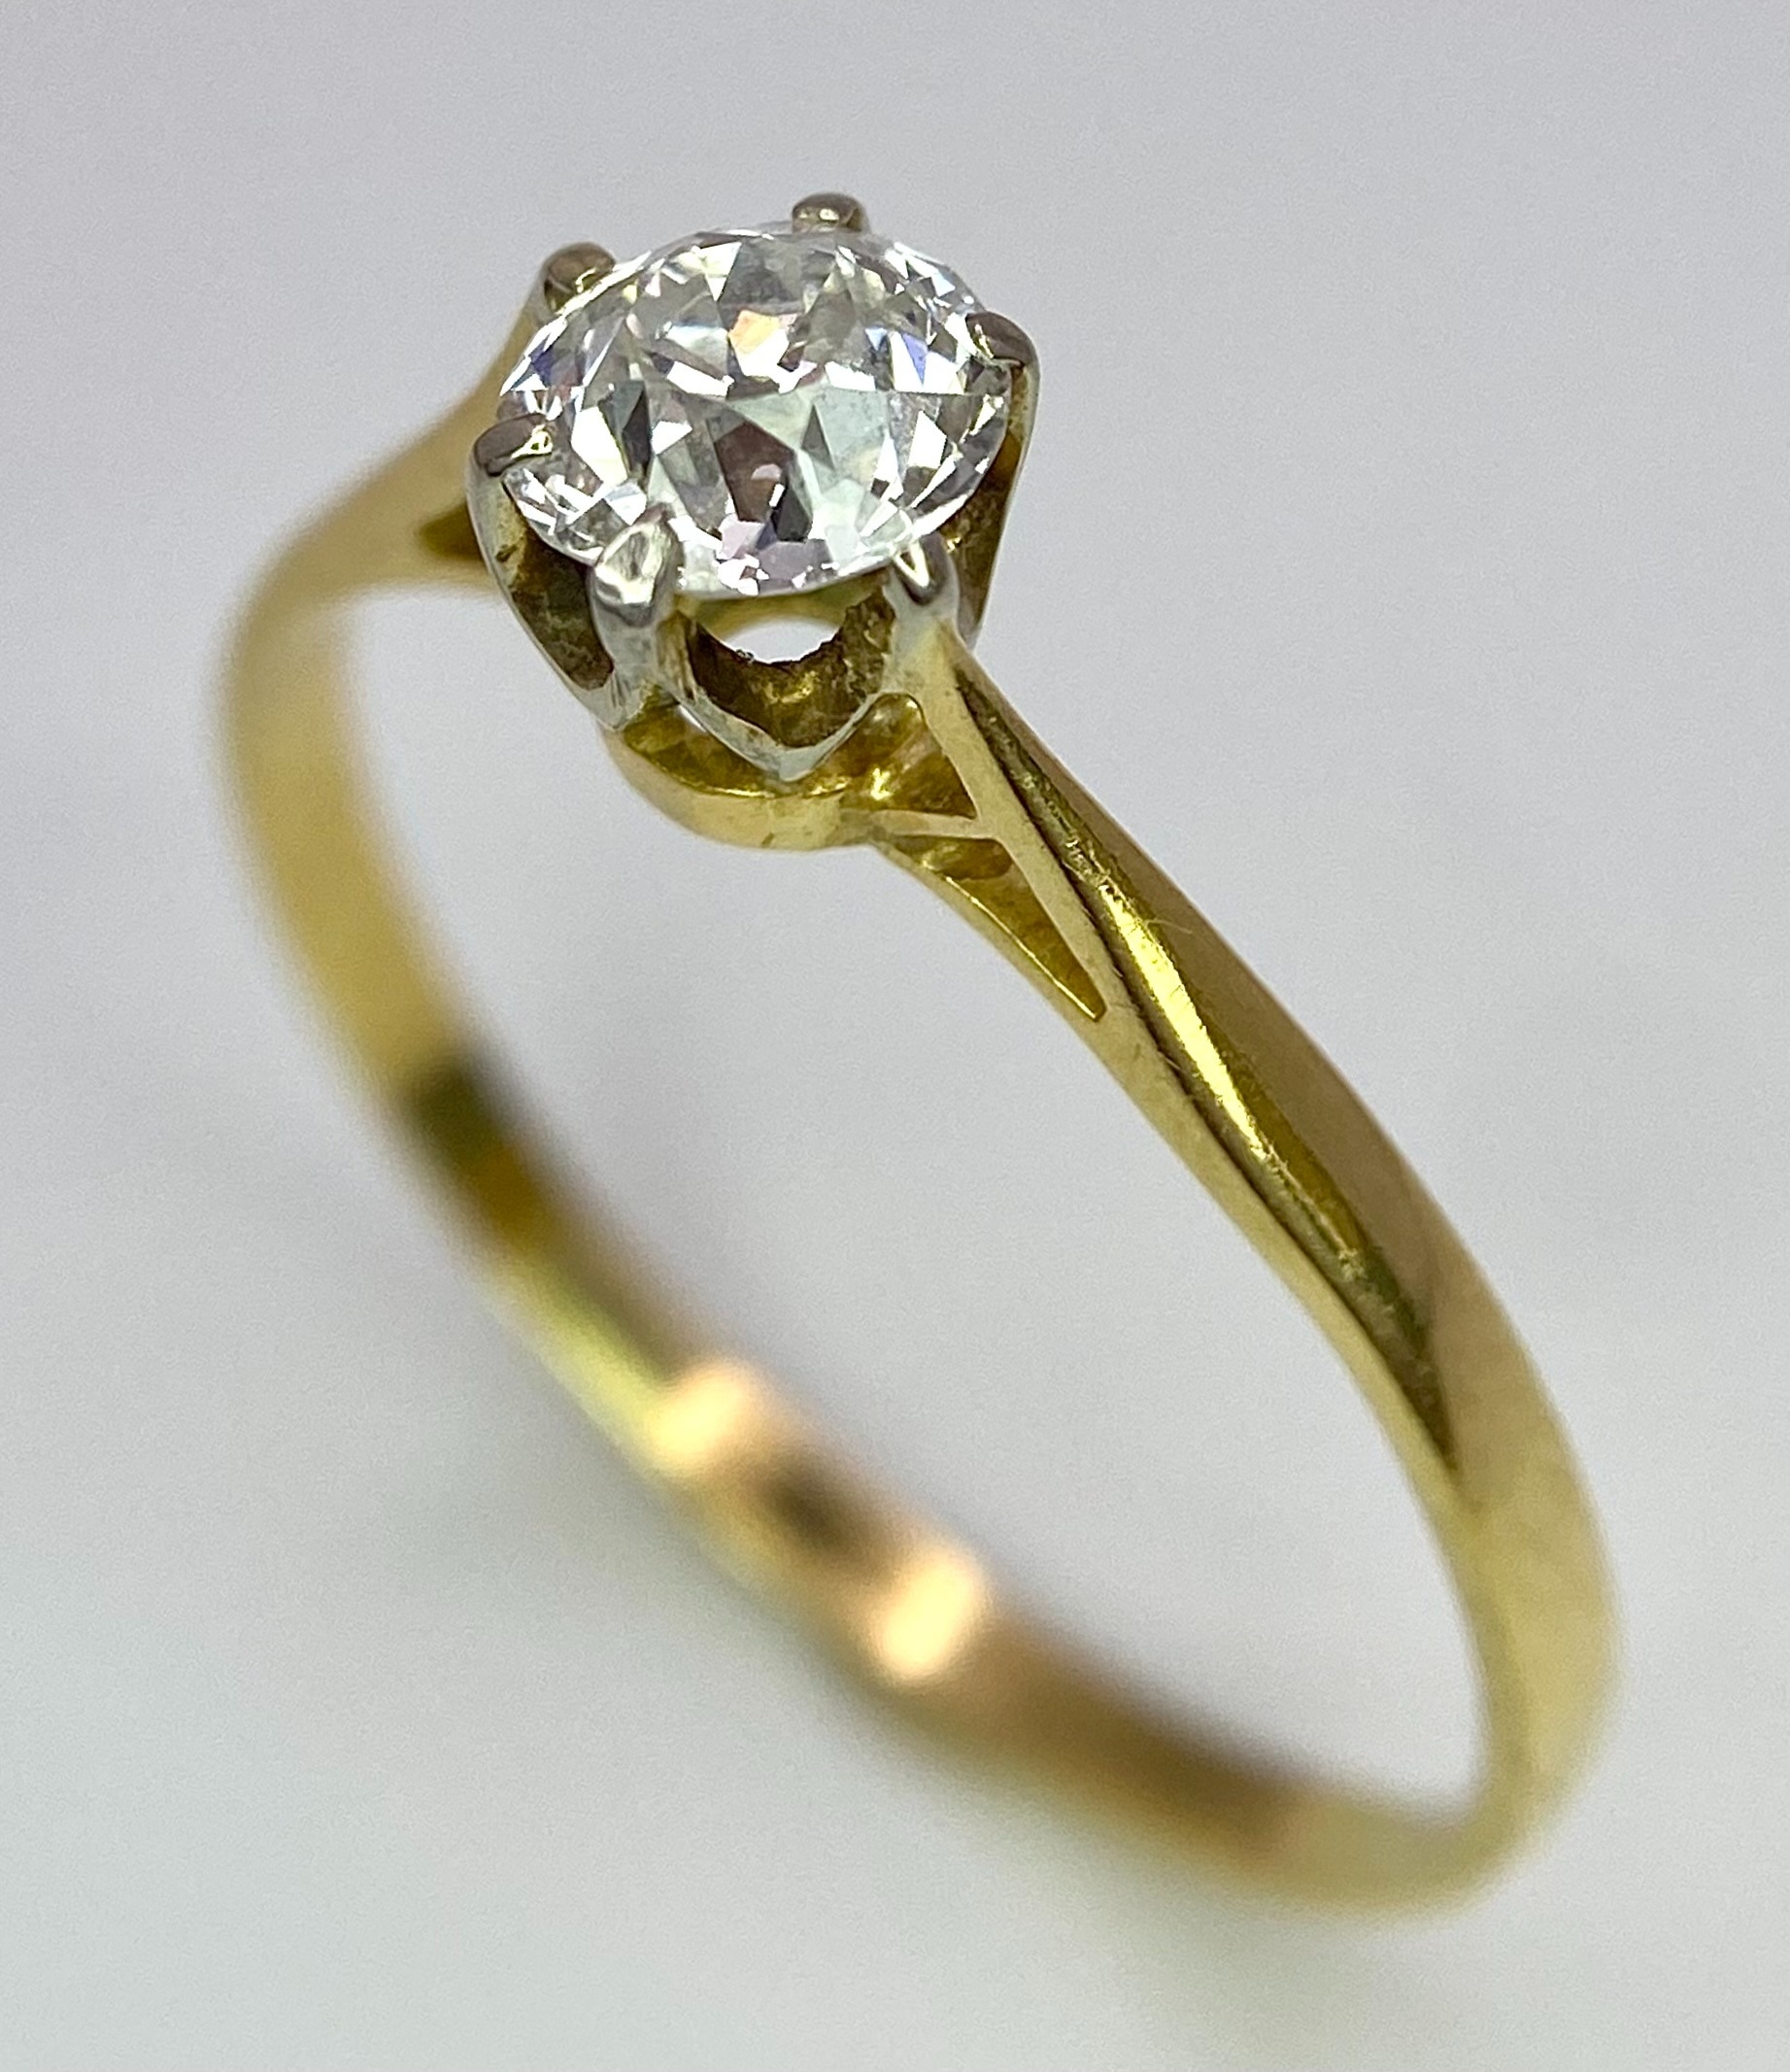 AN 18K YELLOW GOLD, OLD CUT DIAMOND SOLITAIRE RING. 0.40CT. 1.5G. SIZE P 1/2. - Image 2 of 5